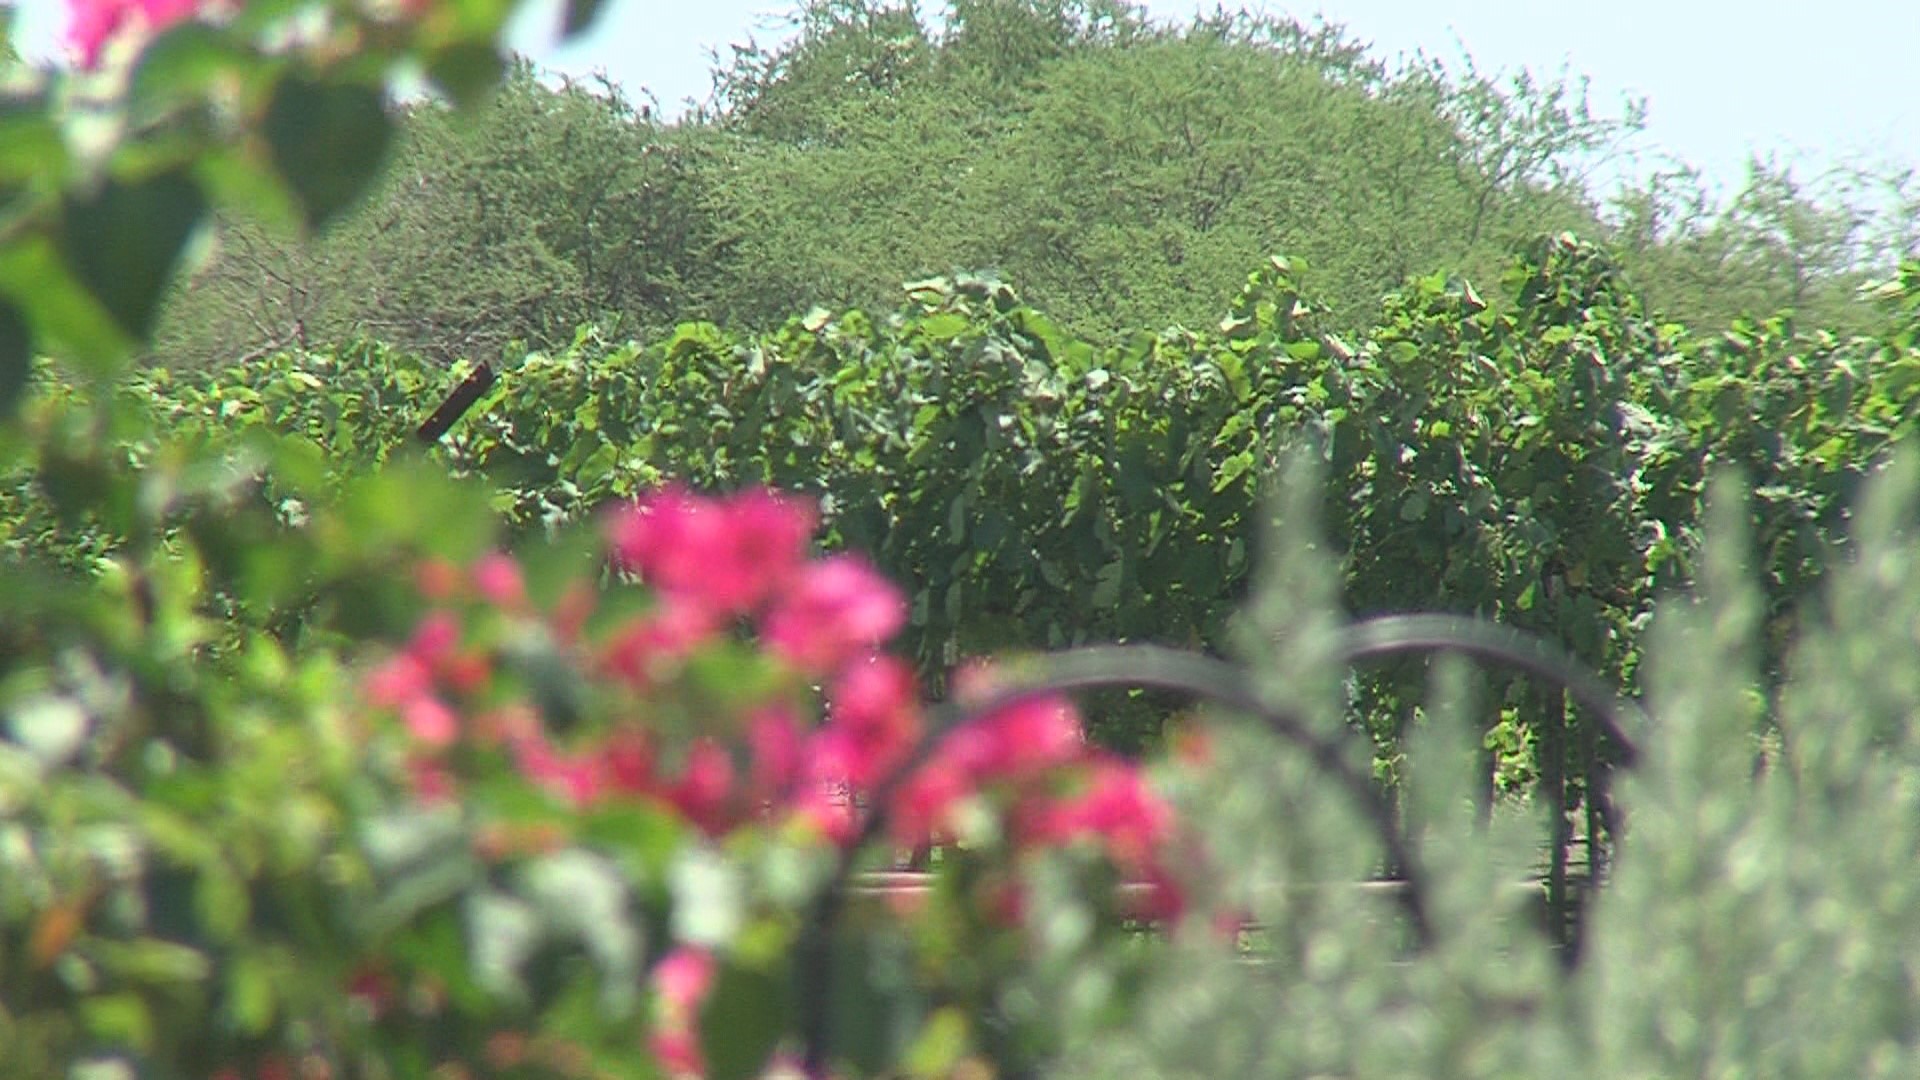 A local family who took a risk on what started as a hobby involving winemaking ended up uncorking a big business.